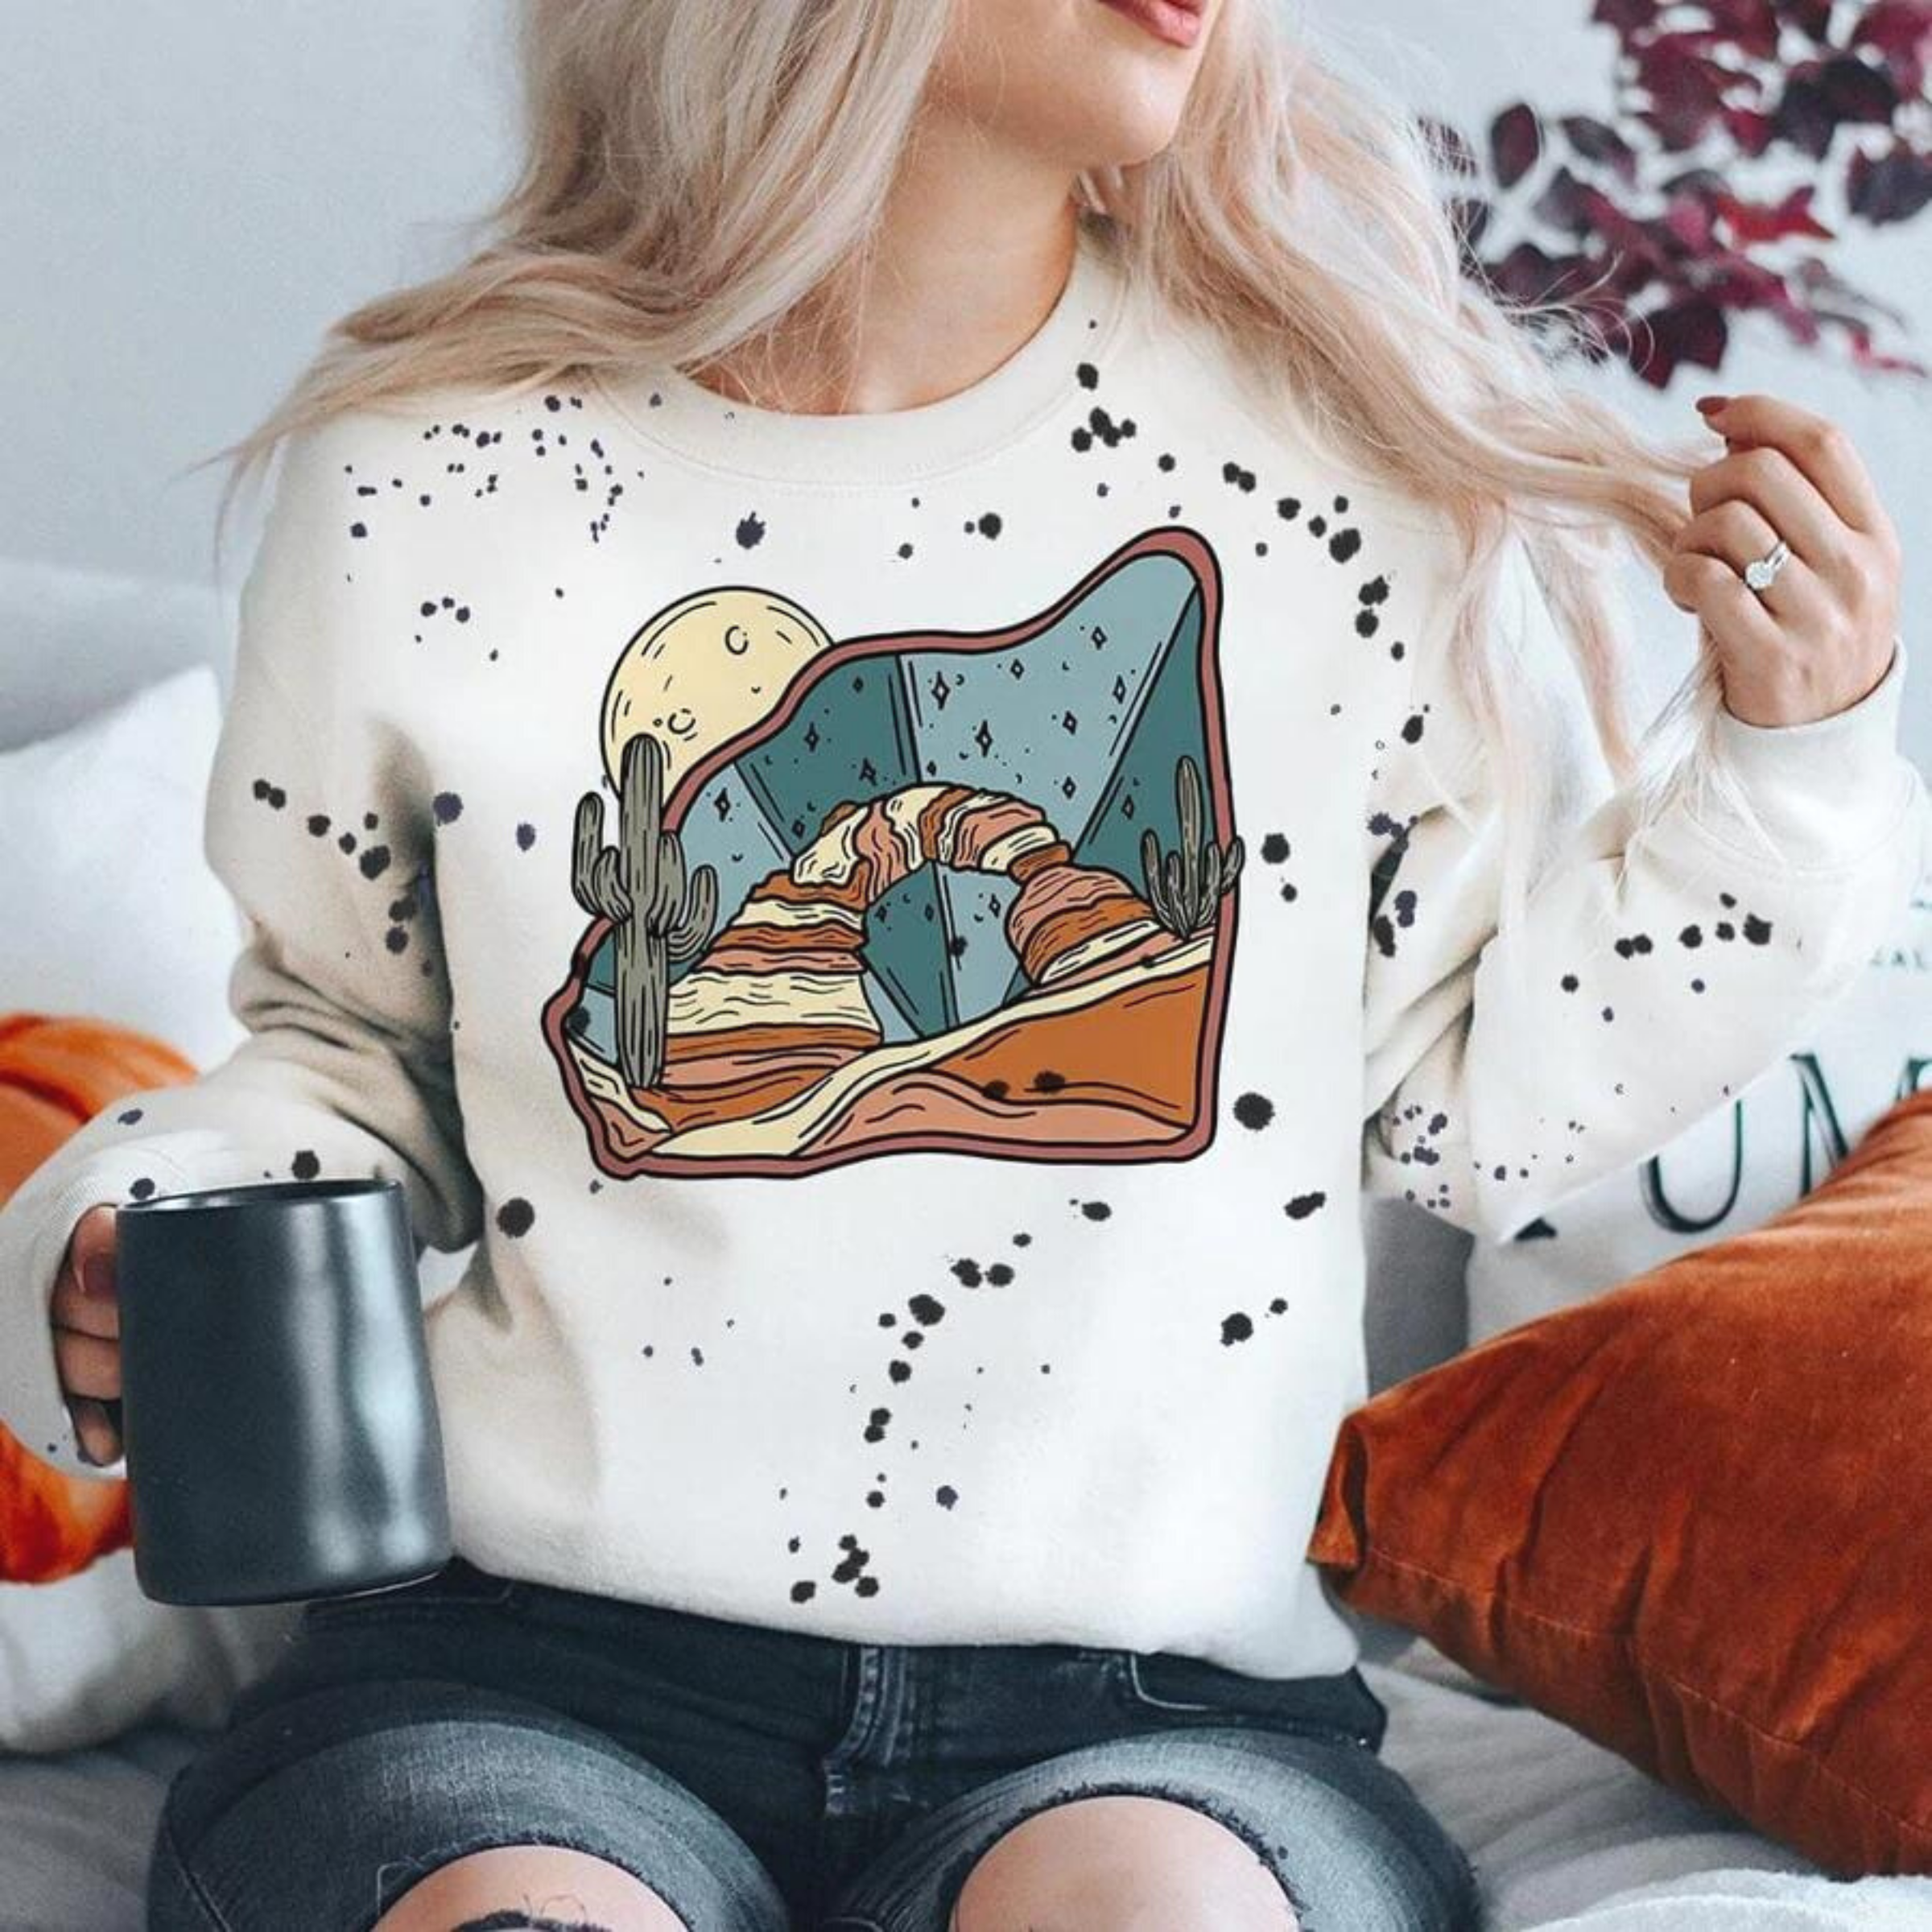 A long sleeve graphic sweatshirt that has an image of a rock arch with saguaro cactus and a moon on a splatter paint background.